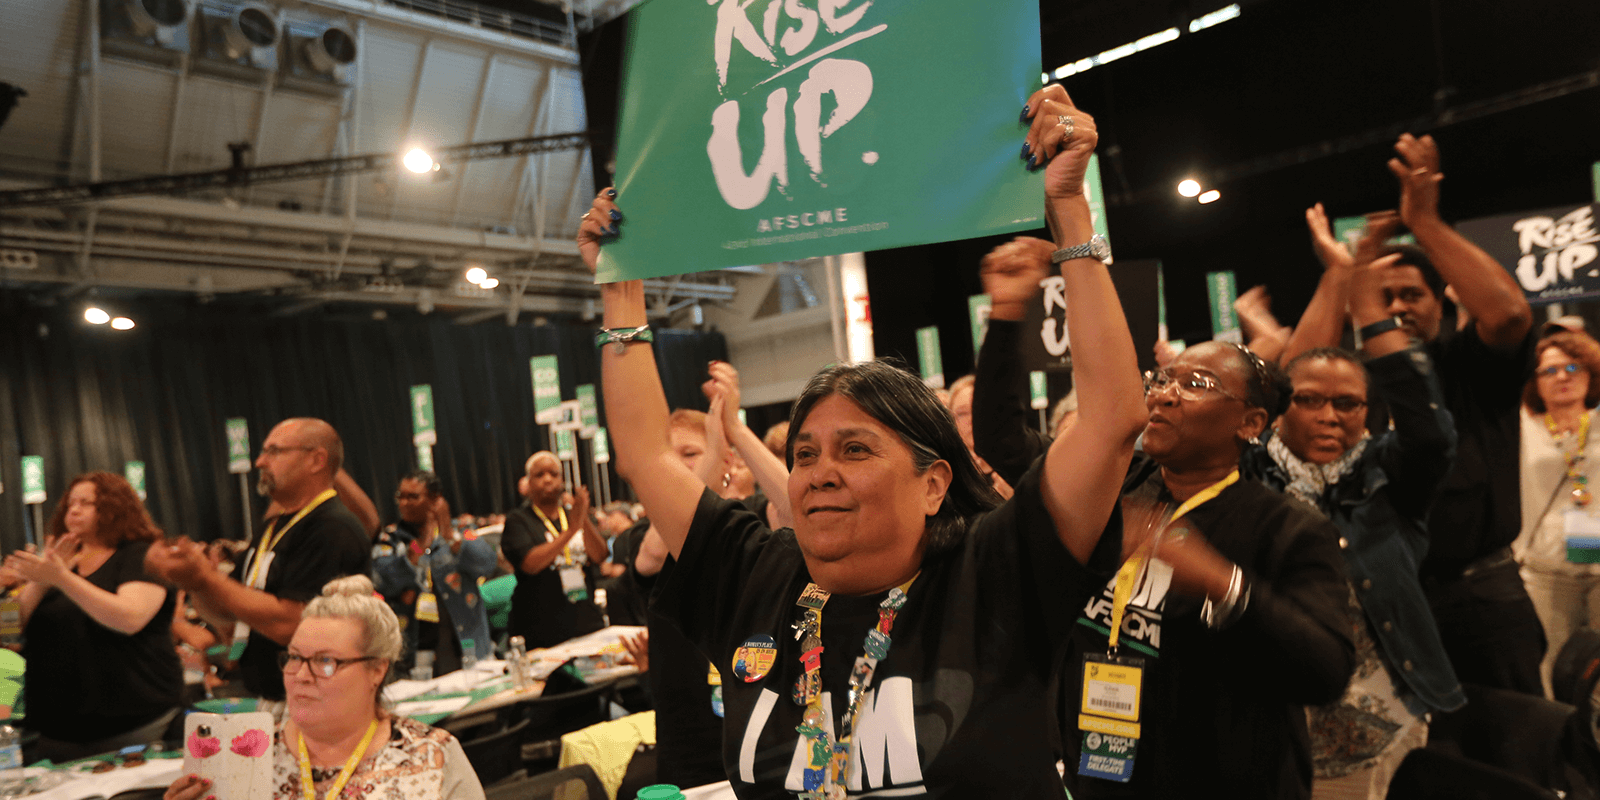 Dividing Workers into Camps is a Right-Wing Plot, not the AFSCME Way